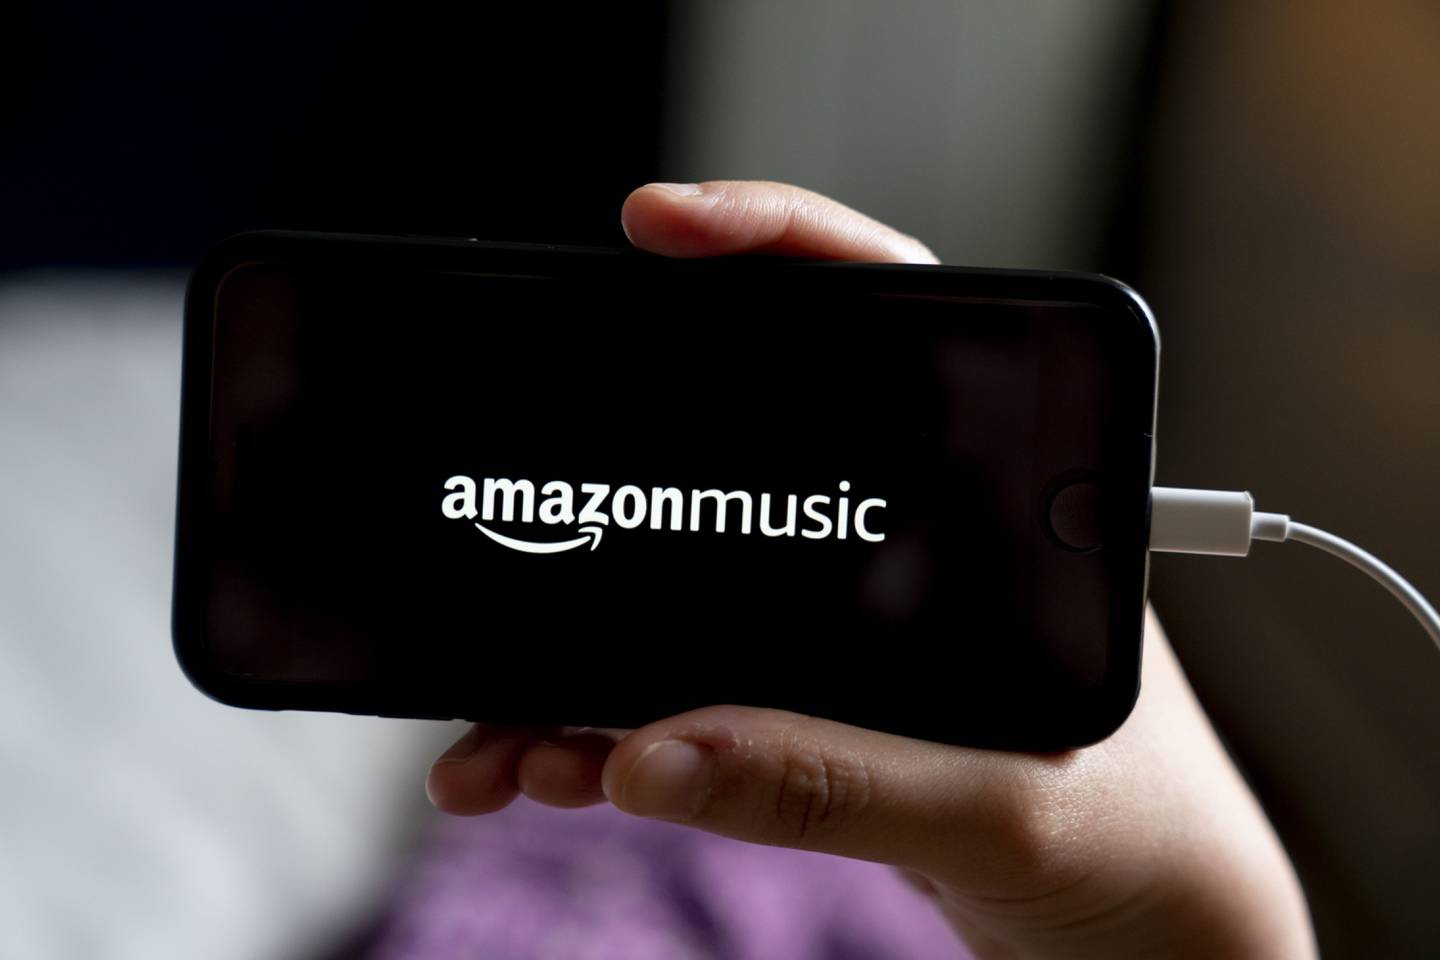 The logo for Amazon Music is displayed on a smartphone in an arranged photograph taken in Arlington, Virginia, U.S., on Thursday, May 21, 2020. Audible's, the audiobook service owned by Amazon.com Inc., big push into the booming audio genre has confused some producers and podcast networks because it is happening at the same time that Amazon Music, a separate division of the e-commerce giant, is also ramping up its investment in podcasts. Photographer: Andrew Harrer/Bloomberg